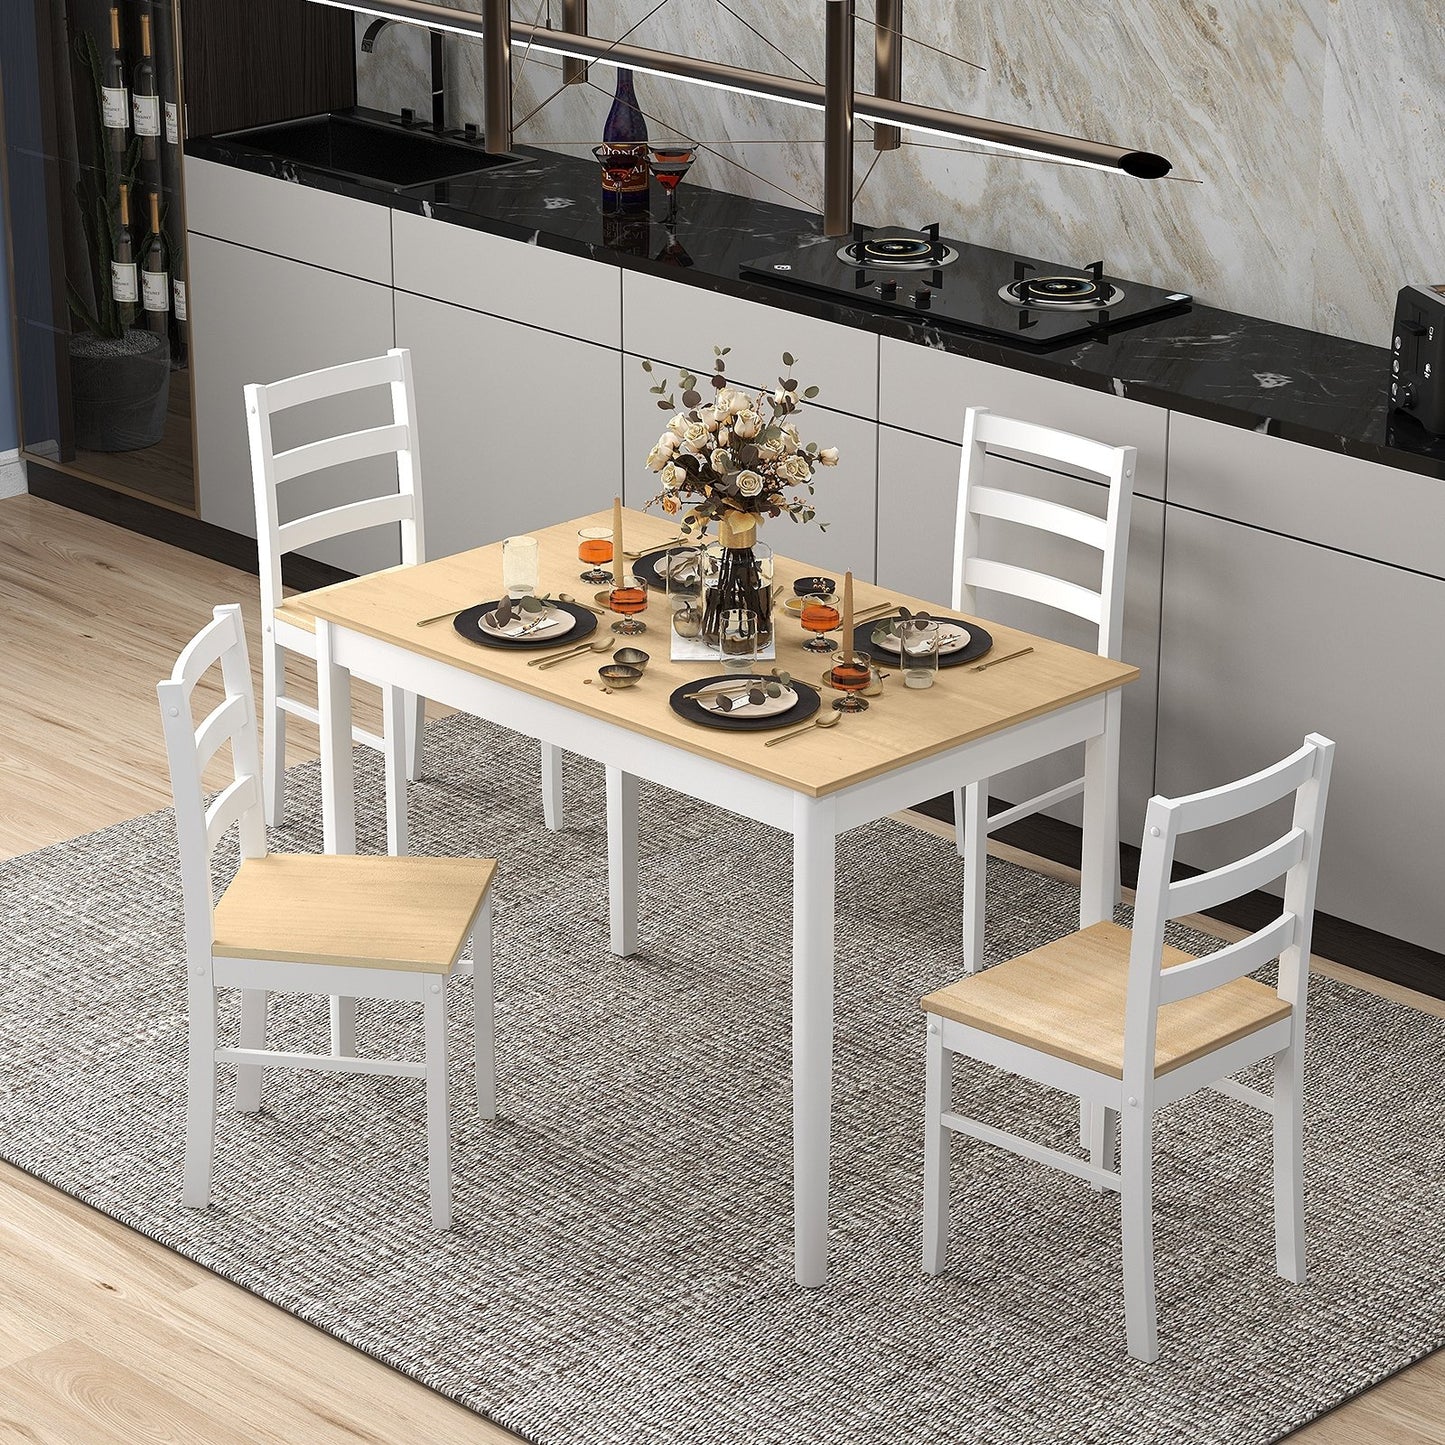 5-Piece Wooden Dining Set with Rectangular Table and 4 Chairs, Natural